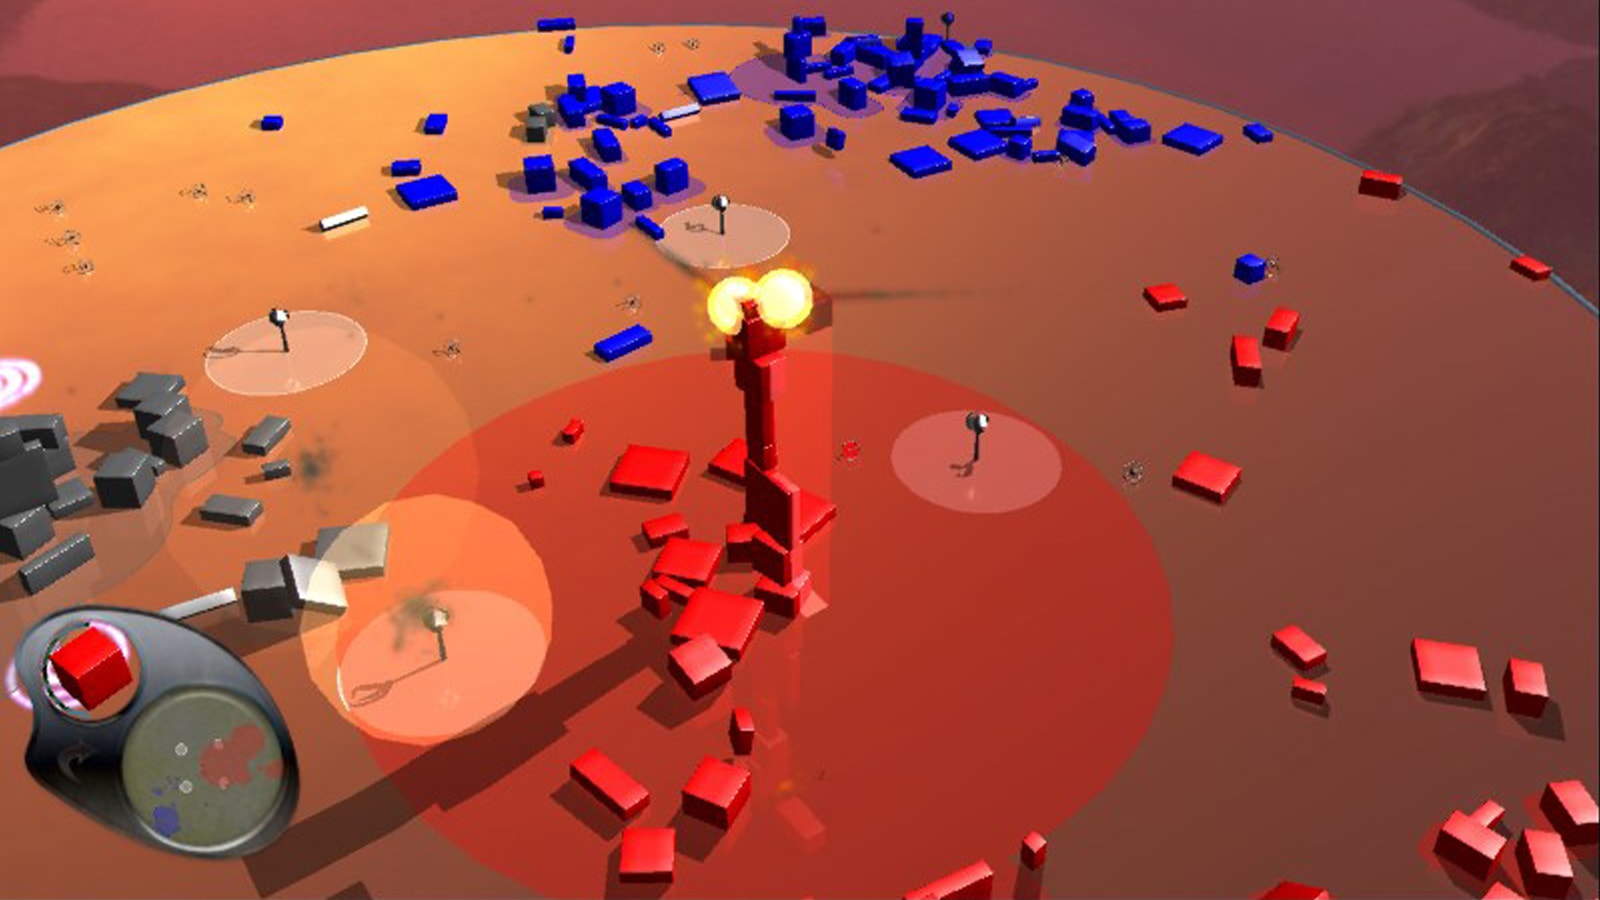 An explosion erupts at the top of a stack of red shapes. 